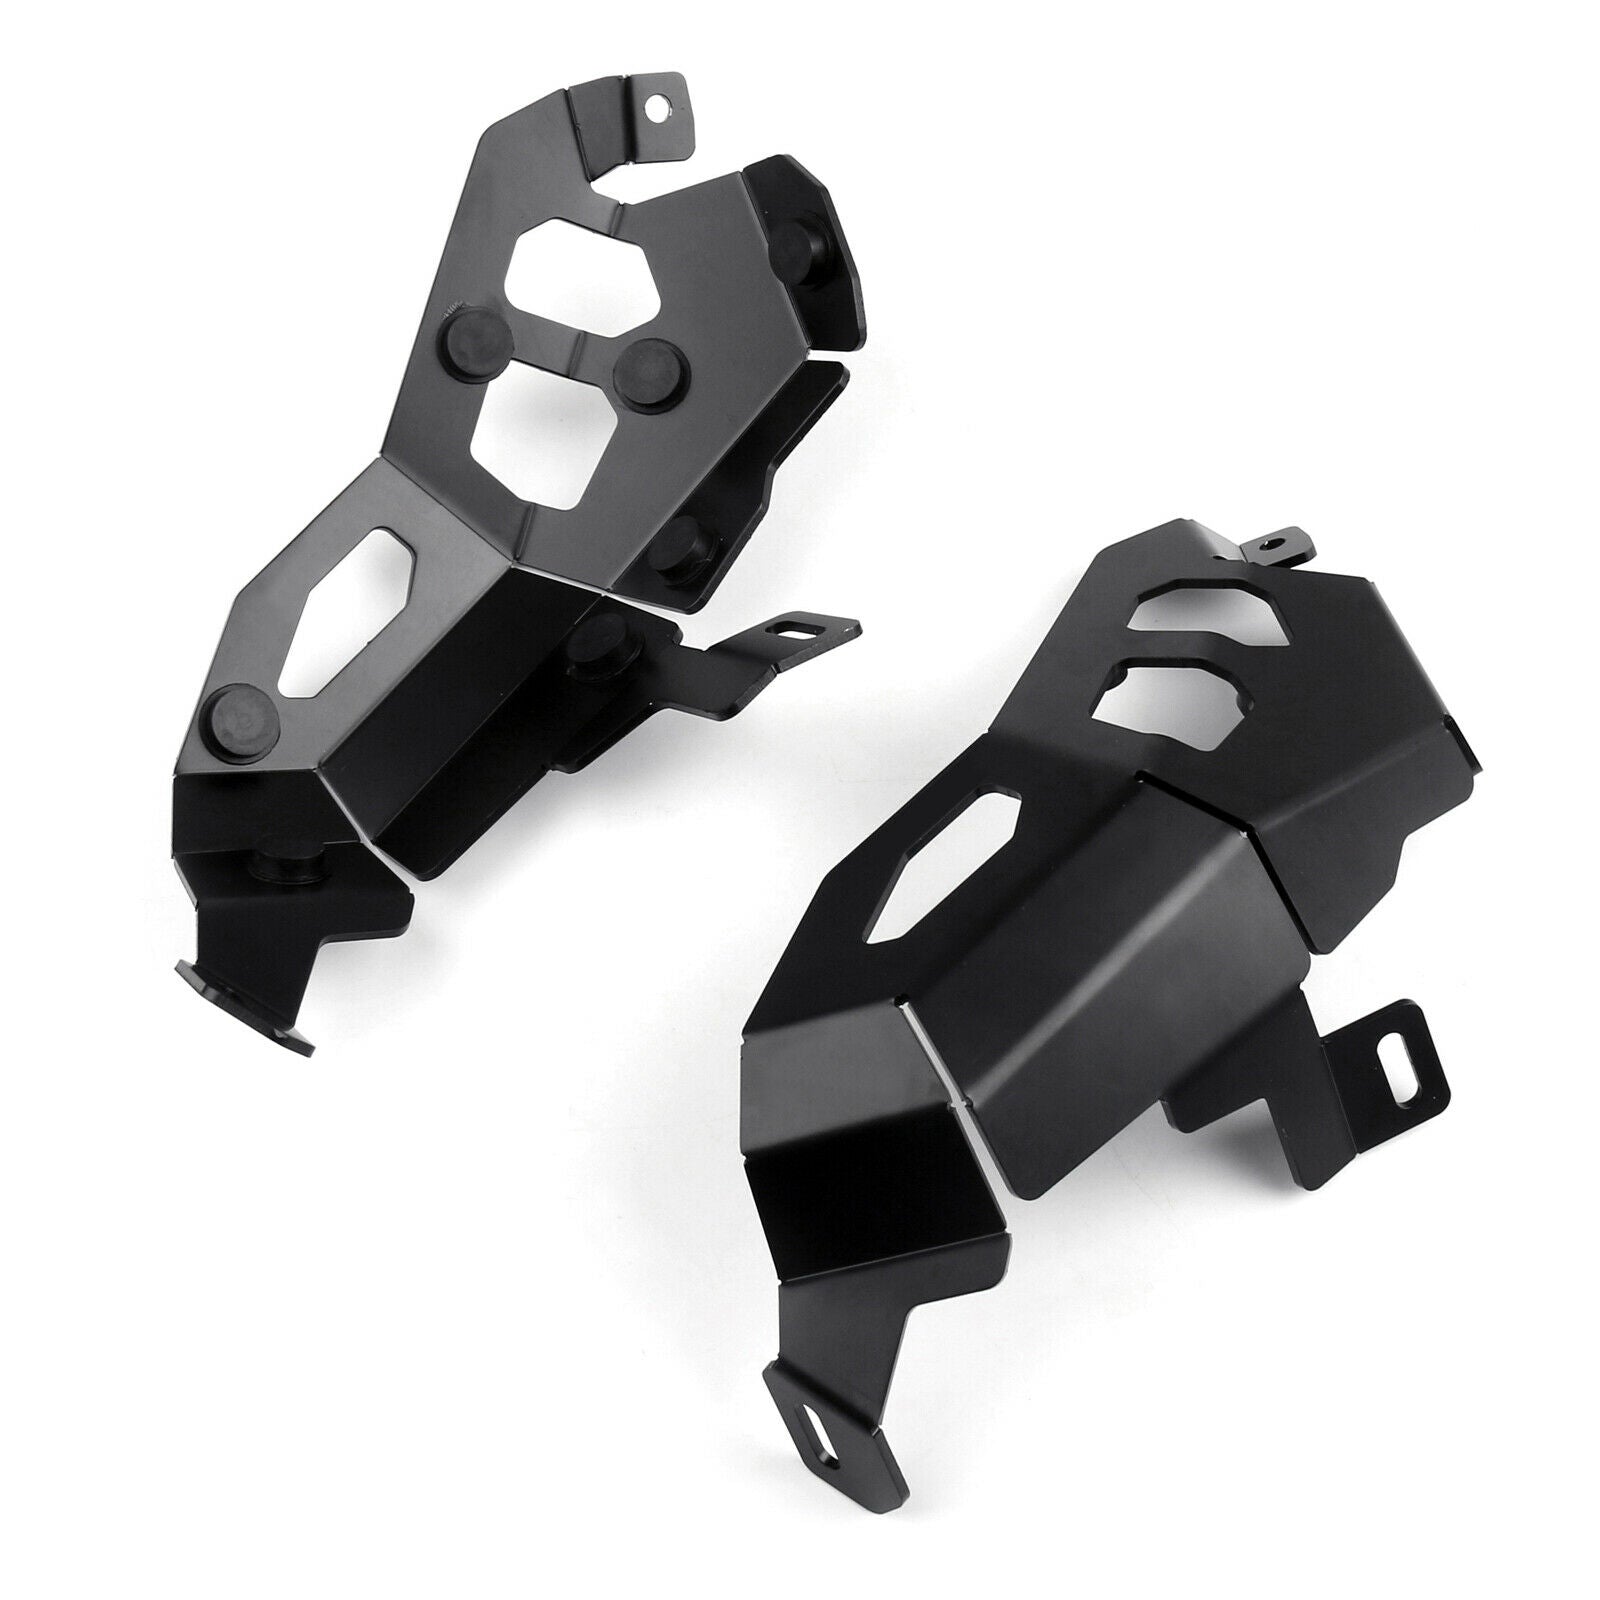 Cylinder Head Guards Protector For BMW R1200GS R1200R R1200RT R1200RS 15-19 BK